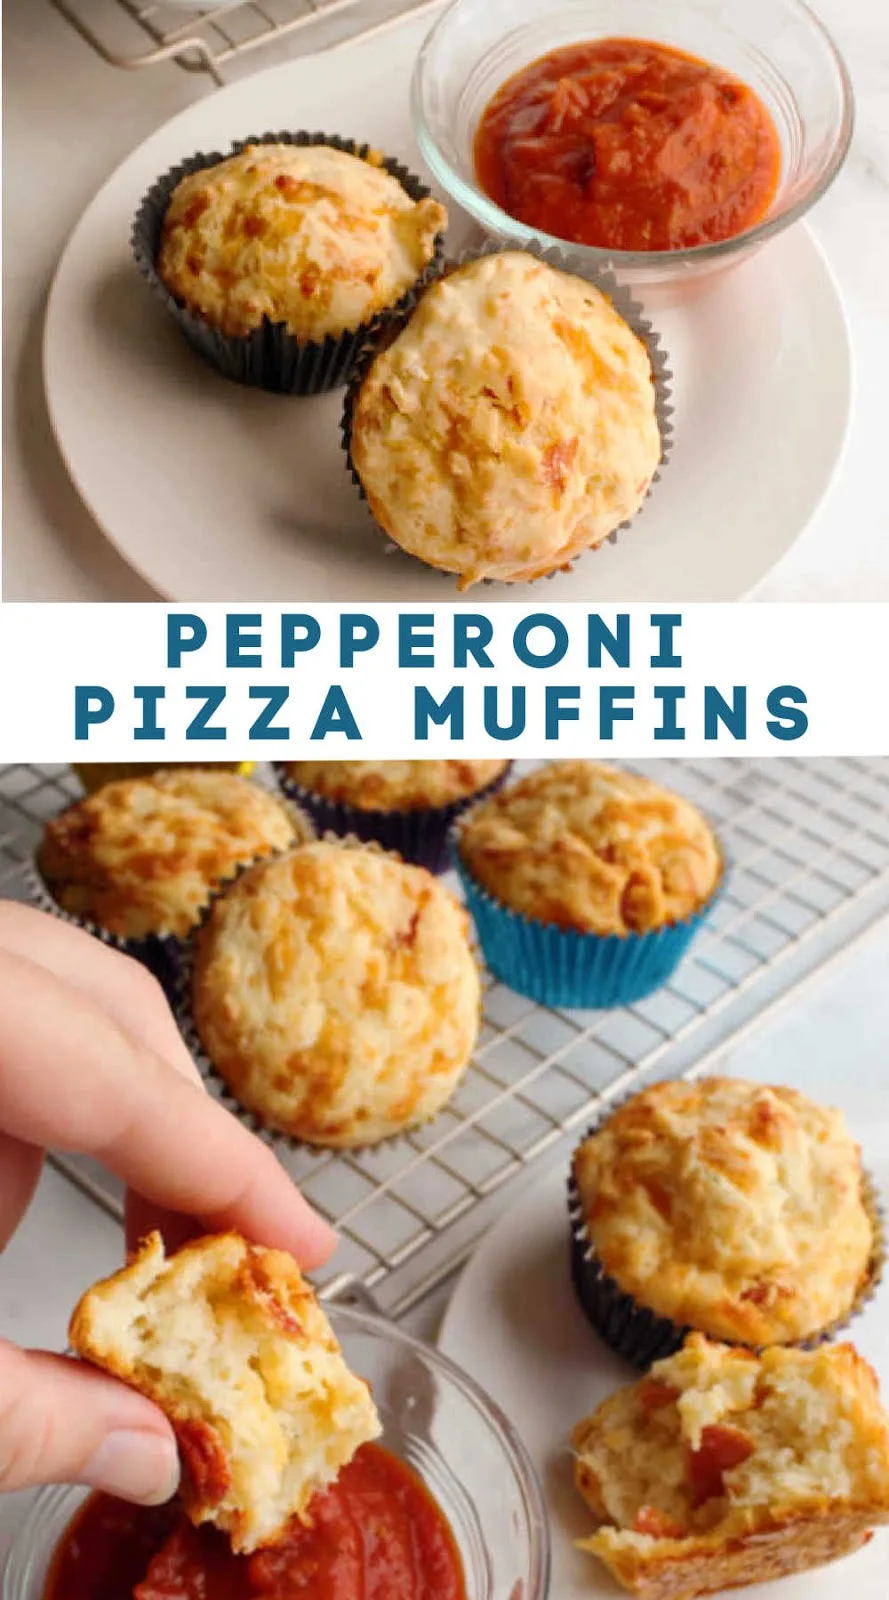 Enjoy pepperoni pizza in muffin form. They are cheesy and filling and super easy to make. While good on their own, they are even better dipped in a side of pizza sauce. Whether you make them for your kid's lunchbox, as an after school snack or for a study group, just be sure to make some.